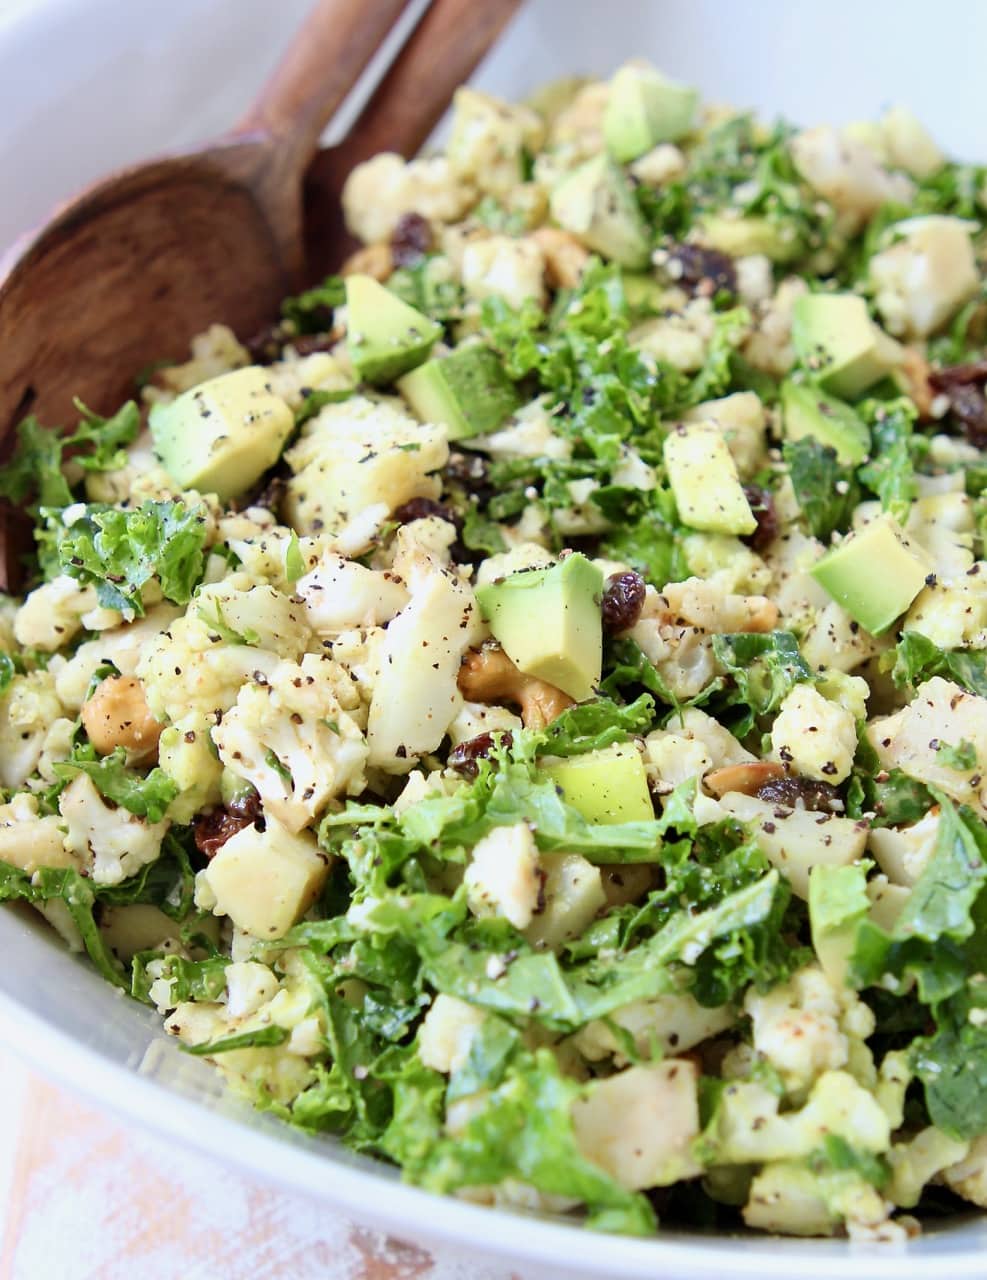 Cauliflower salad with kale, raisins and avocado in white bowl with brown wooden spoon